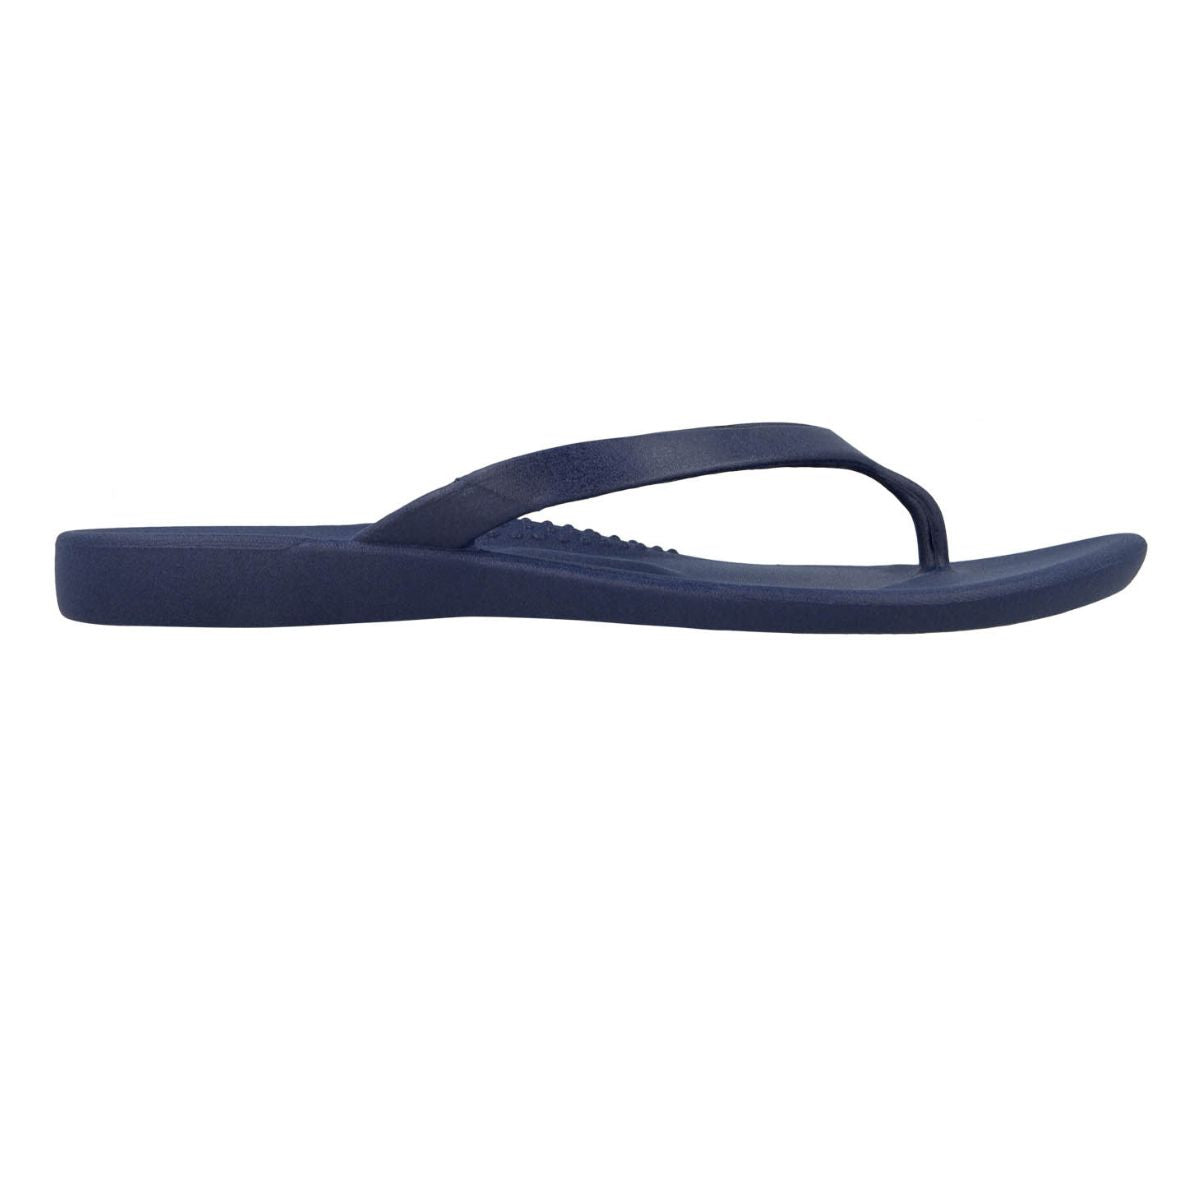 Oka-B Millie Women's Flip Flop with Signature Support